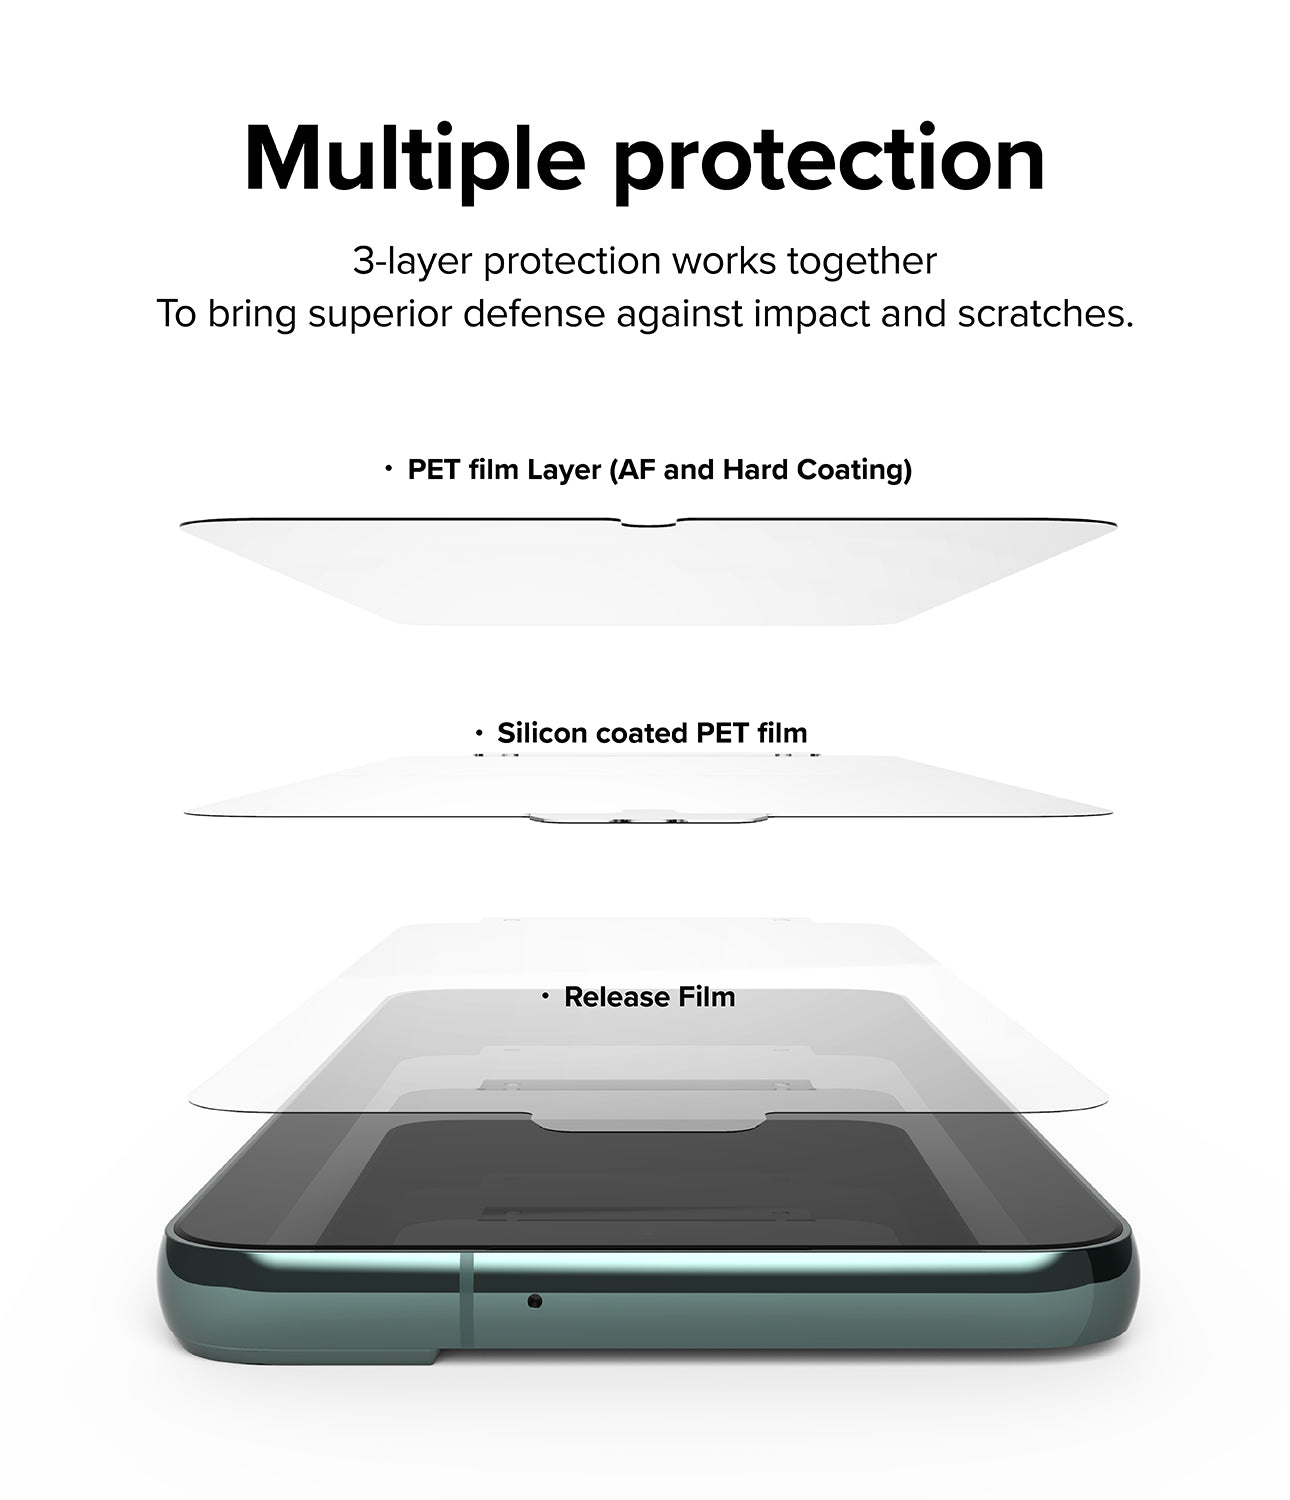 Galaxy S22 Plus Screen Protector | Glass Coated Film - Ringke Official Store